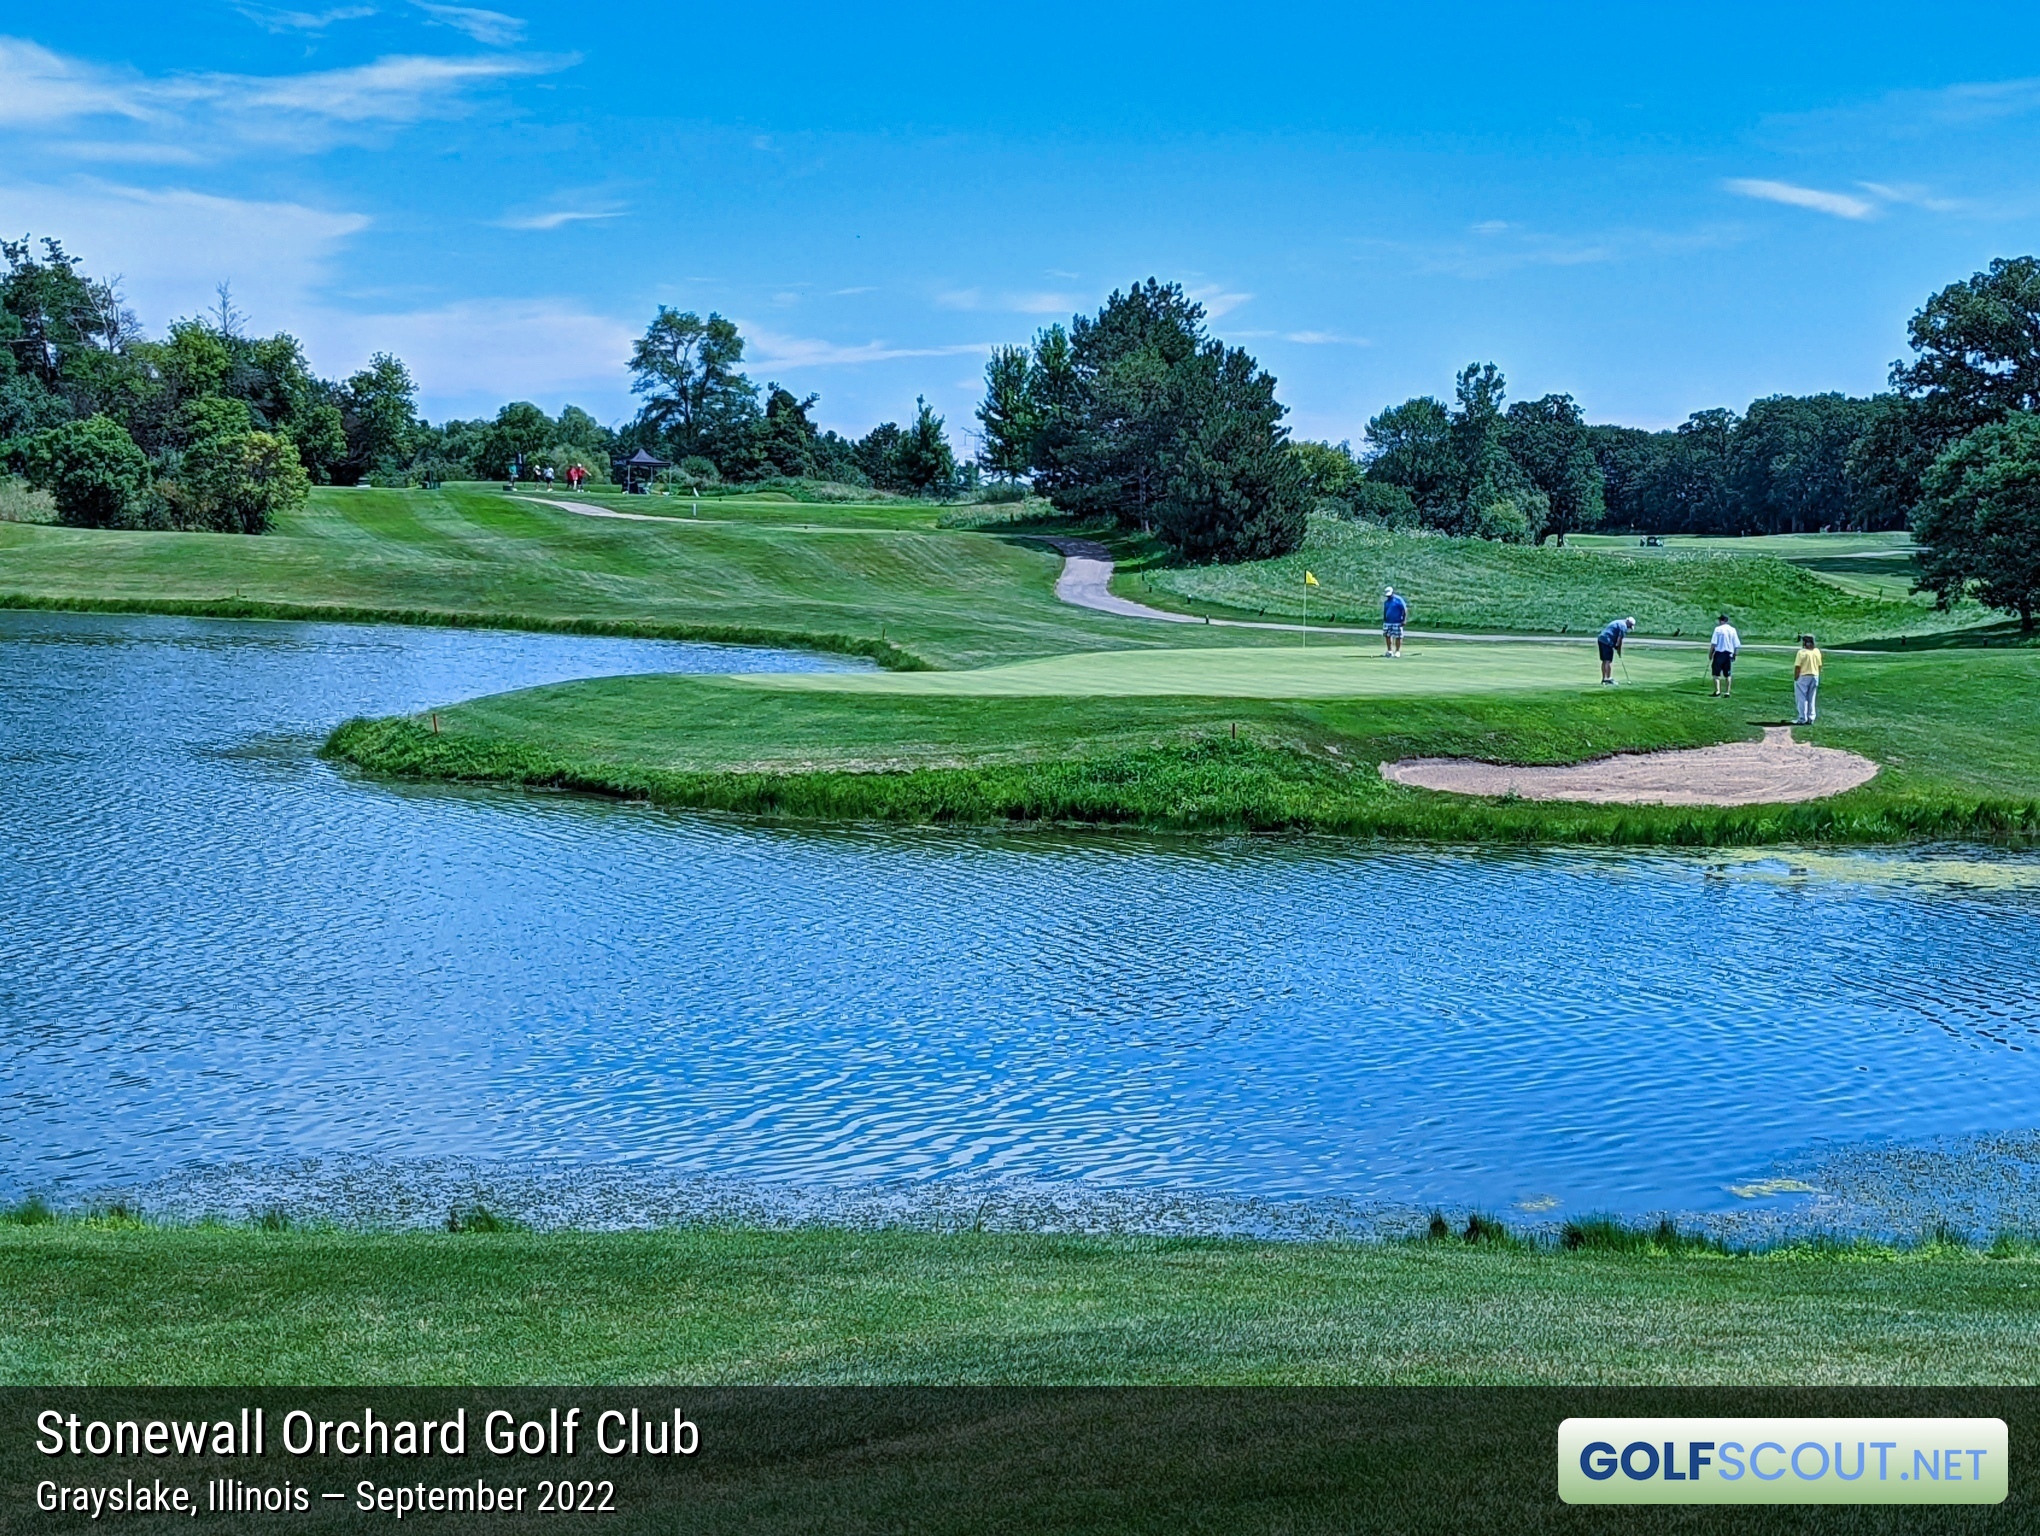 Miscellaneous photo of Stonewall Orchard Golf Club in Grayslake, Illinois. A view of the 9th green from across the pond.